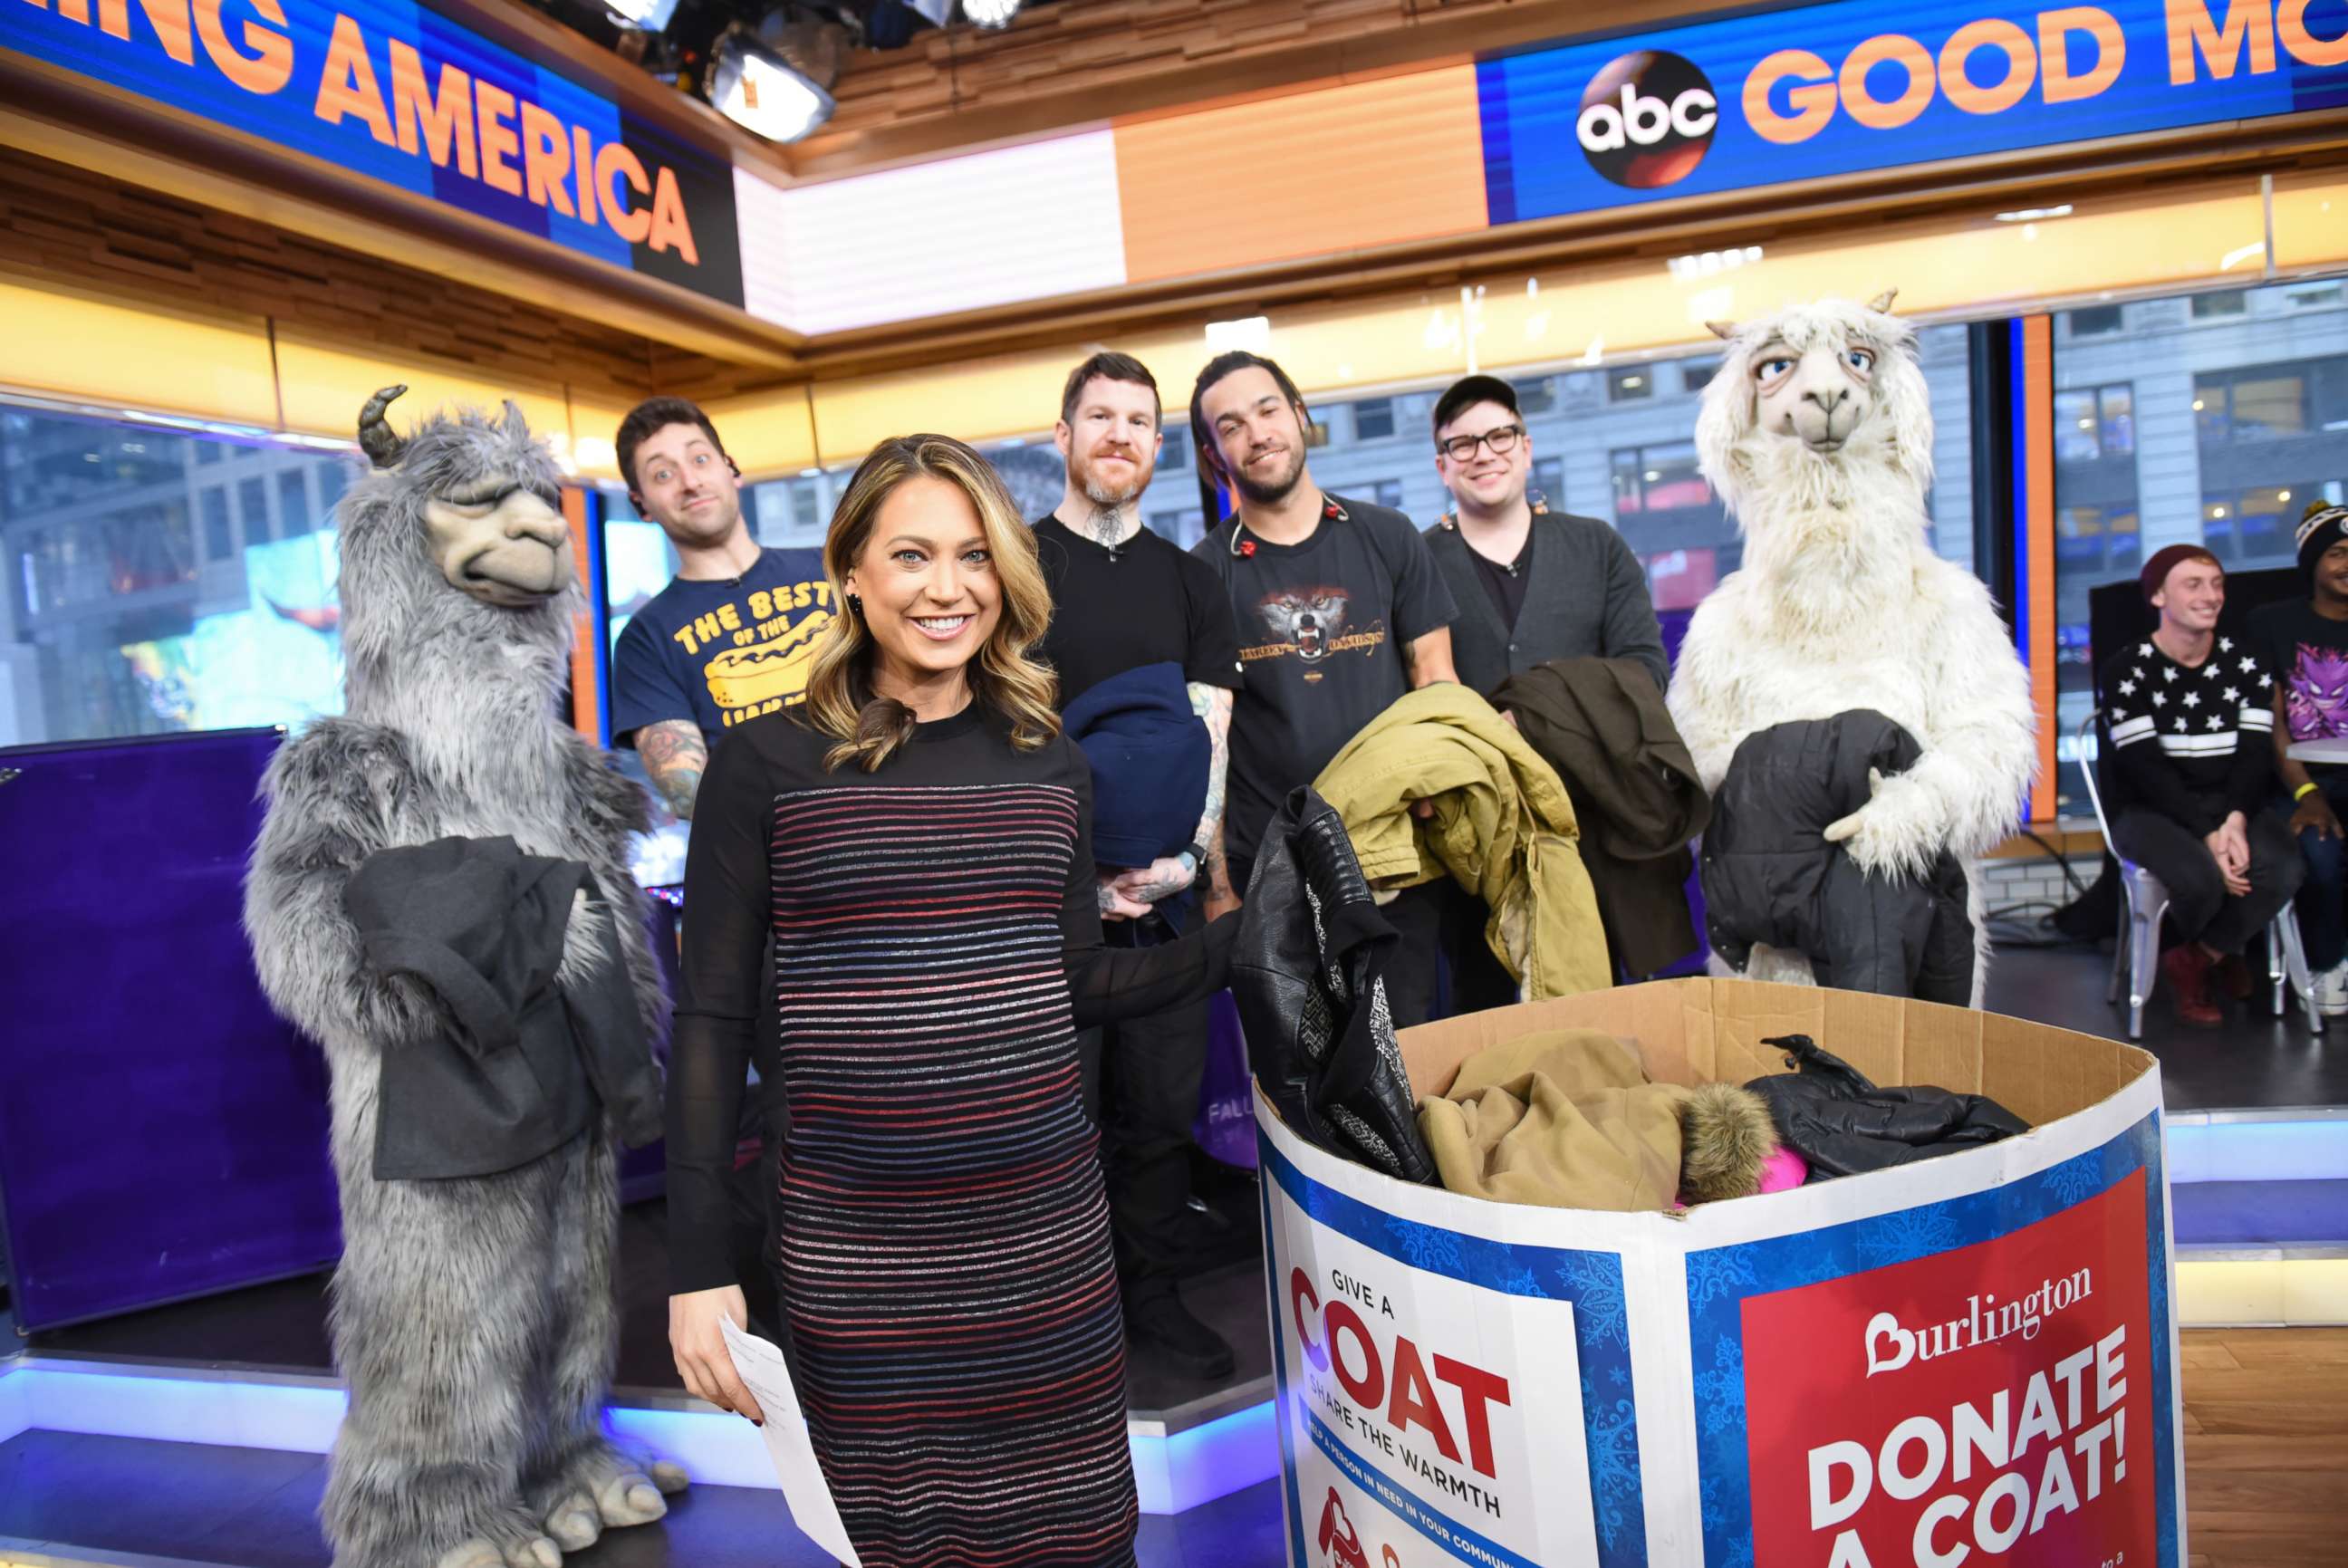 PHOTO: Fall Out Boy performs live on "Good Morning America," Jan. 19, 2018 posing with Ginger Zee.